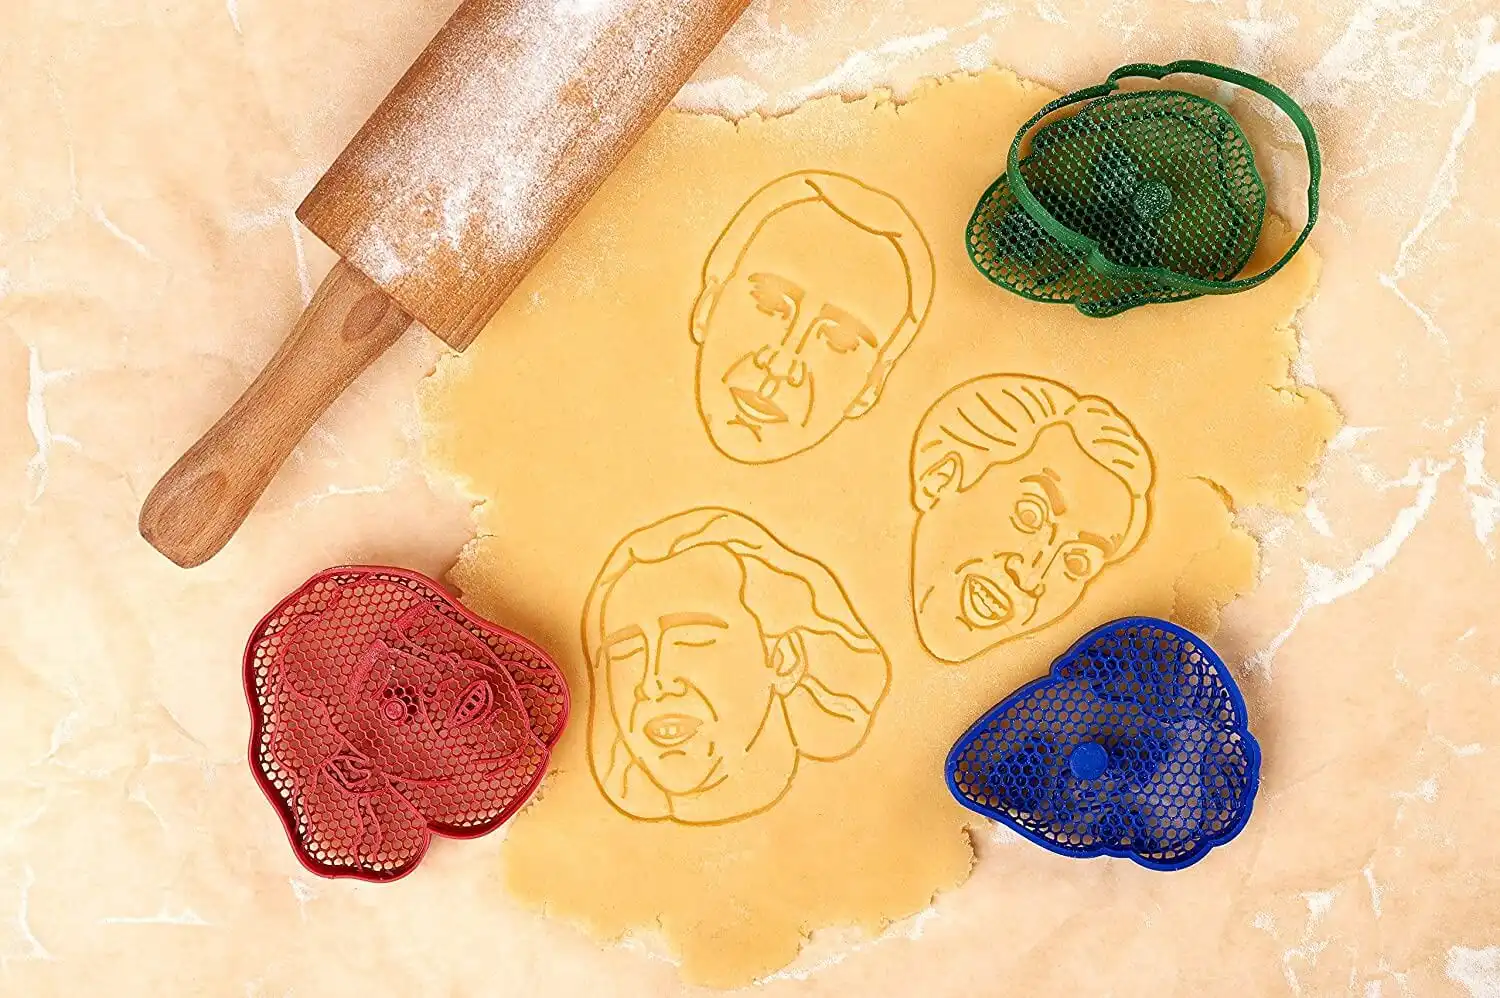 Nicolas Cage cookie cutters